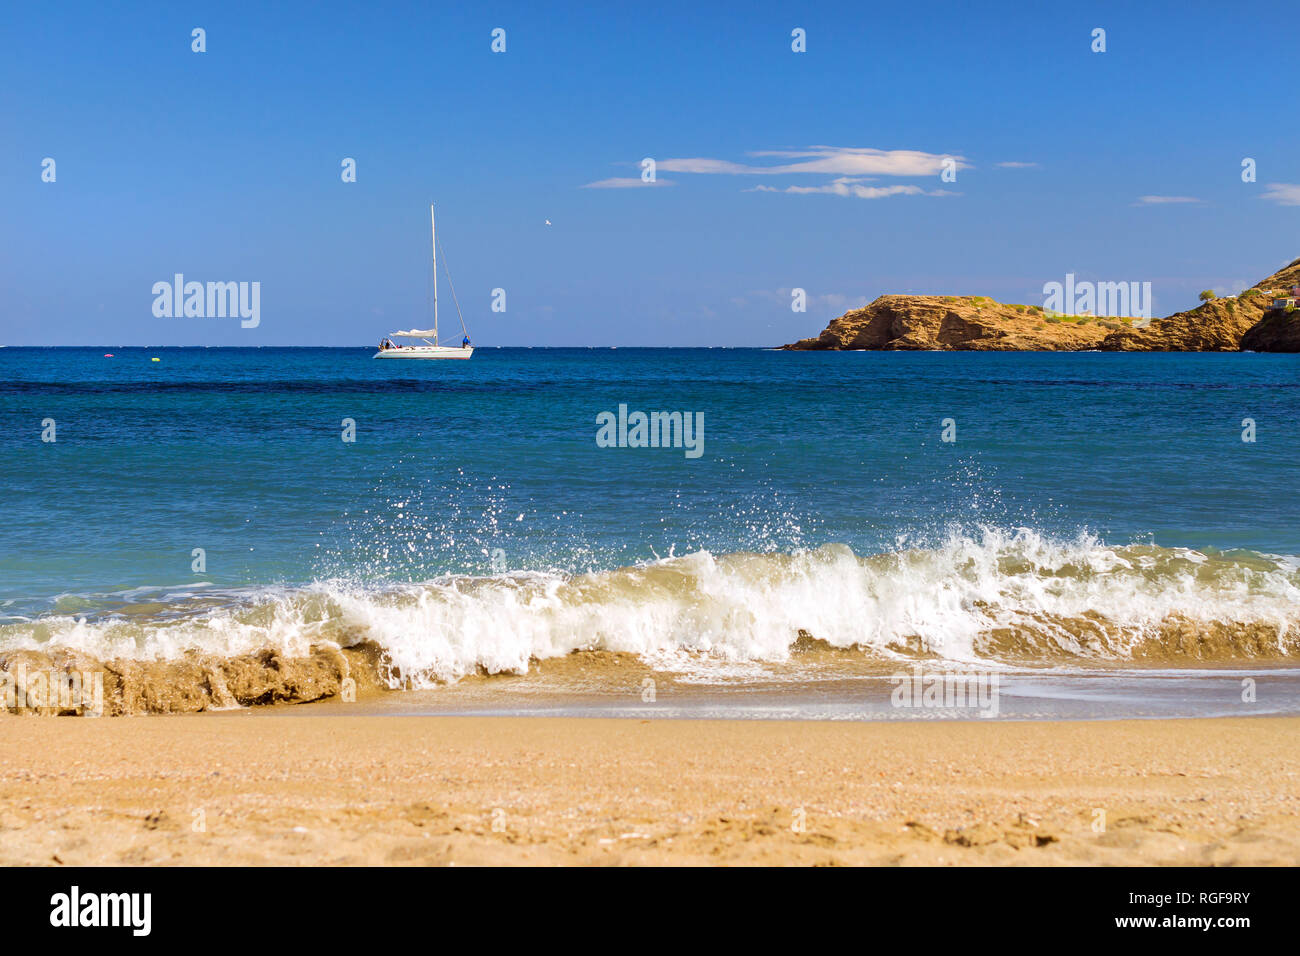 Boat trips on a white sailing yacht. View from sunny Livadi beach in resort village Bali. Rethymno, Crete Greece. Extreme water sports as active recreation on sunny vacations Stock Photo